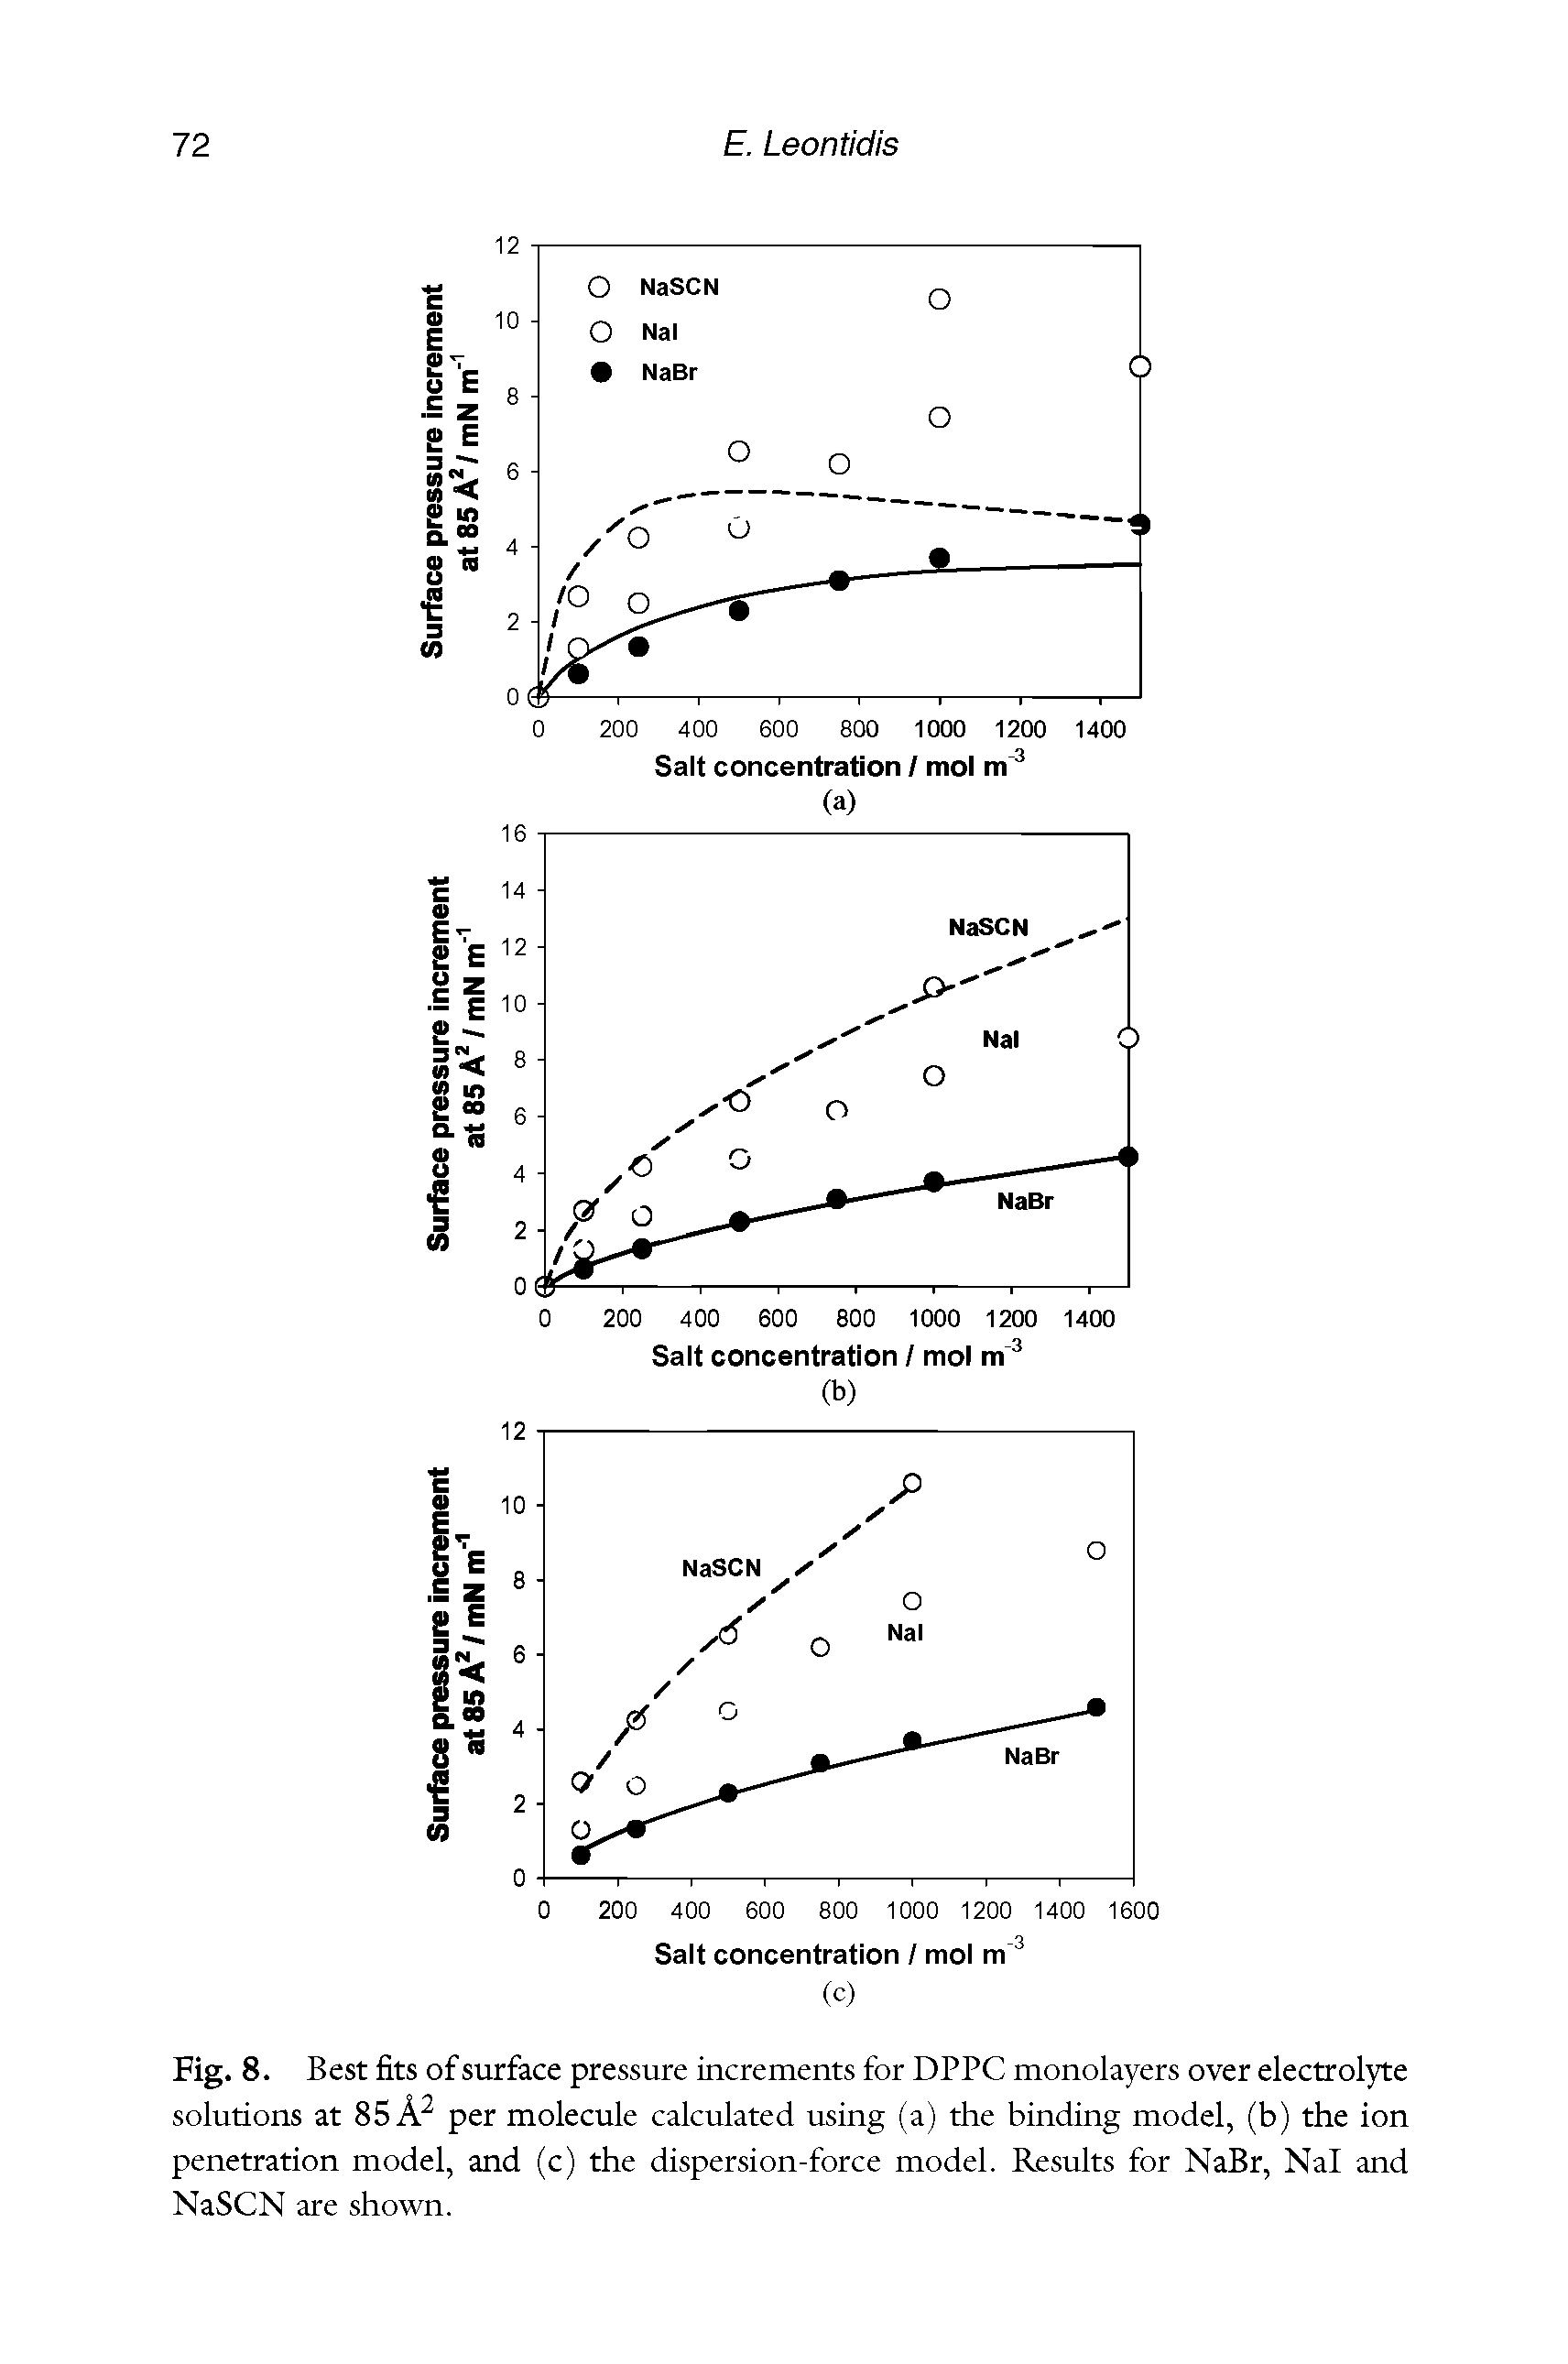 Fig. 8. Best fits of surface pressure increments for DPPC monolayers over electrolyte solutions at 85 per molecule calculated using (a) the binding model, (b) the ion penetration model, and (c) the dispersion-force model. Results for NaBr, Nal and NaSCN are shown.